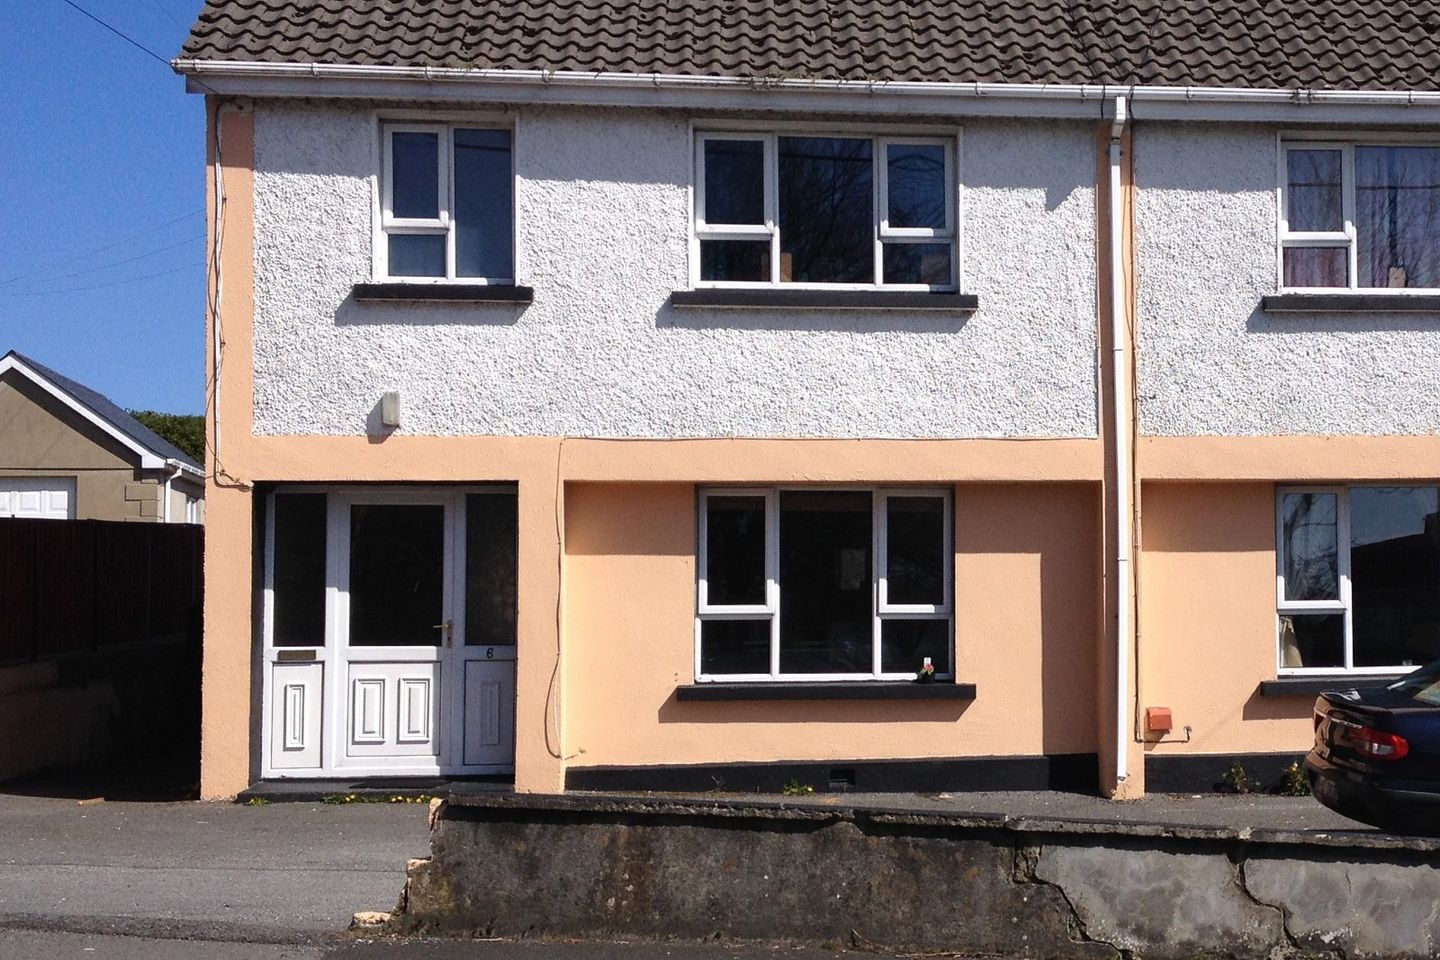 6 College Row, Letterkenny, Co. Donegal, F92VWX6